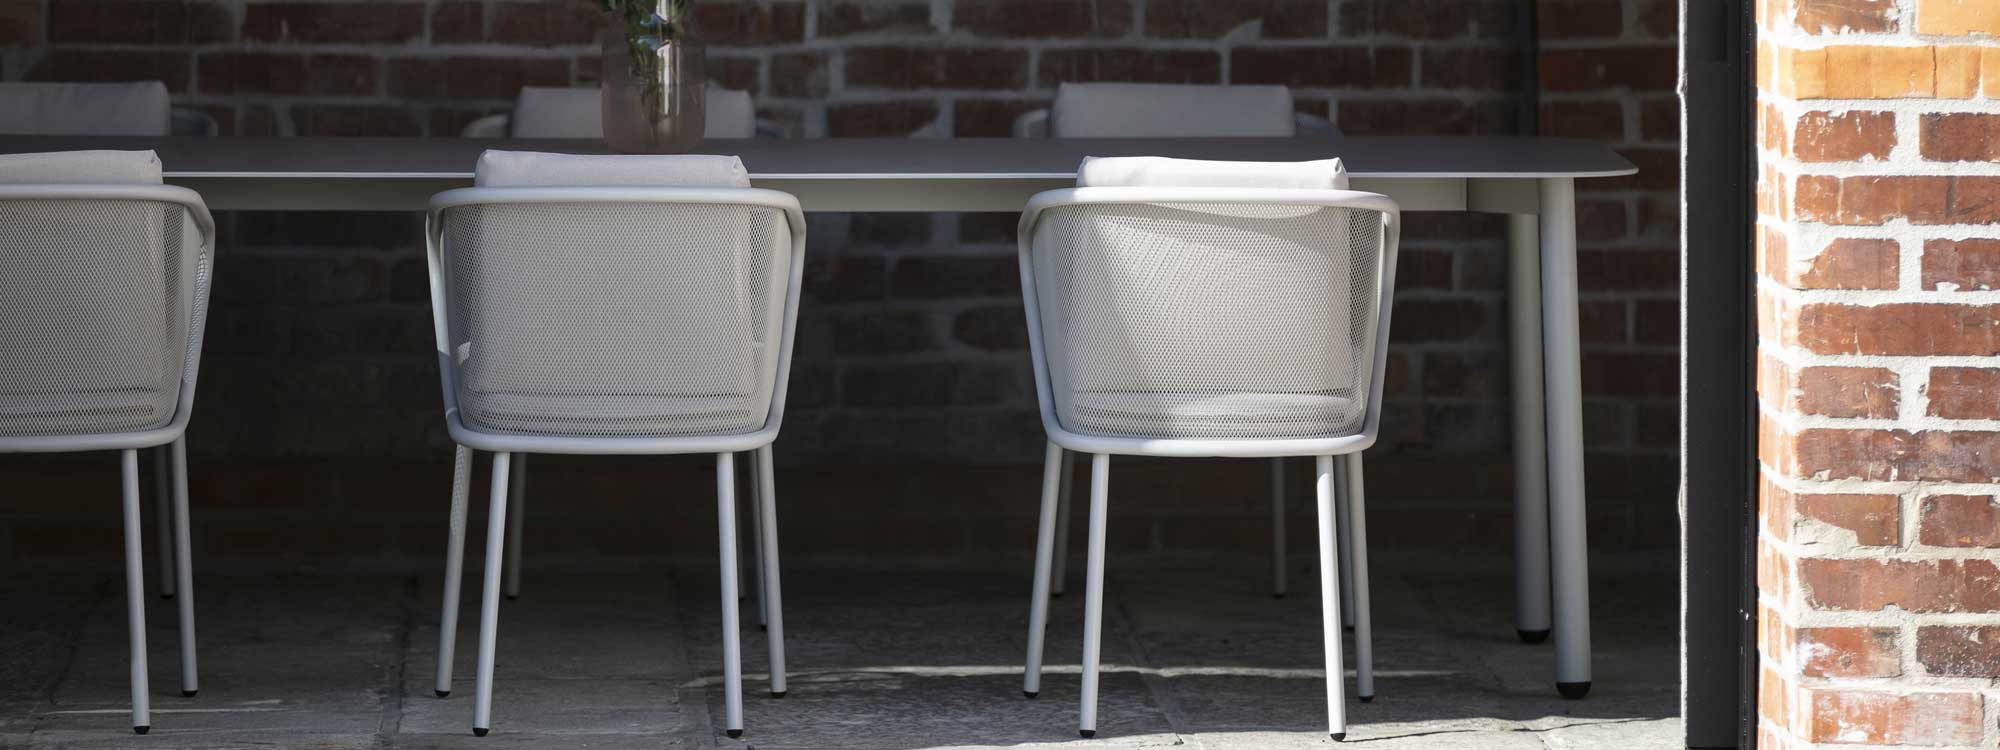 Condor garden chair's steel mesh back lends transparency to the furniture's design